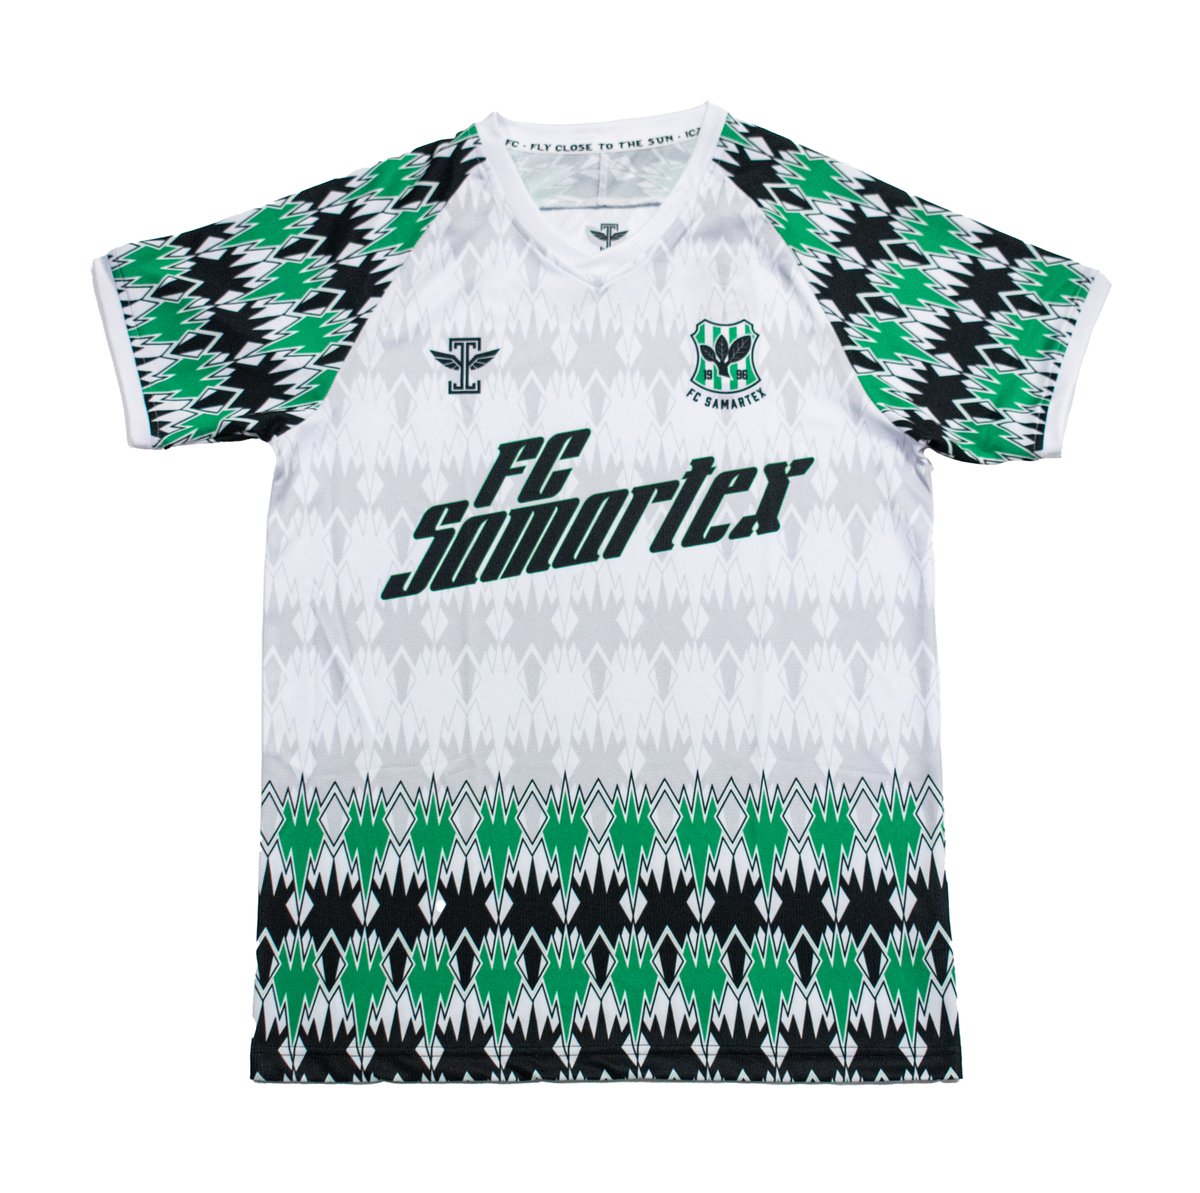 *GIVEAWAY* To honor our contest offering 1 fan a trip to Bhutan, we thought we'd open another Icarus hype train: FC Samartex, sitting top of the Ghana PL. To be in with a chance to win your very own Samartex shirt, simply follow us and retweet the below Bhutan announcement!